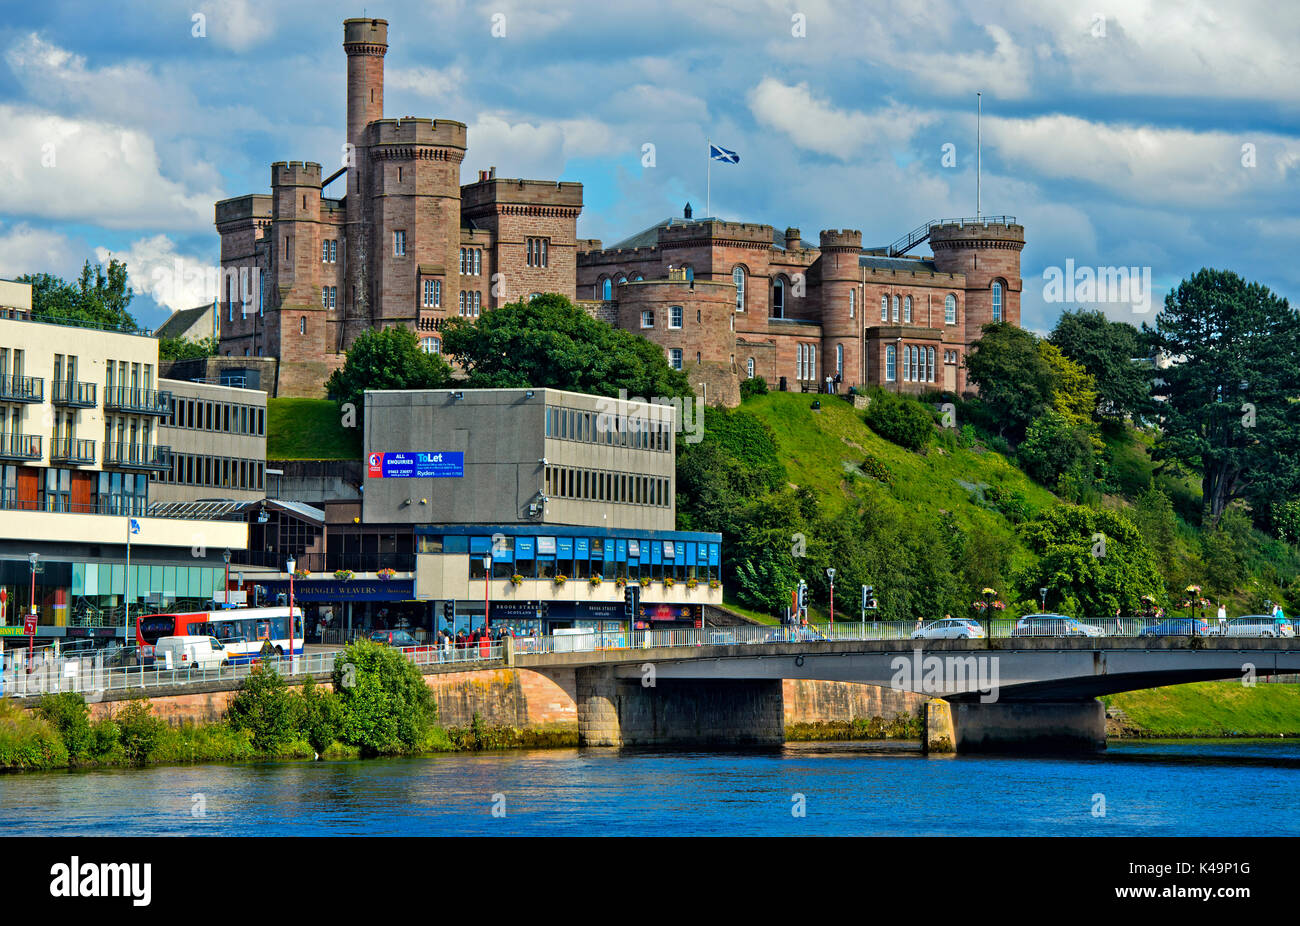 Inverness Castle Rising Above The River Ness, Inverness, Scotland, Great Britain Stock Photo